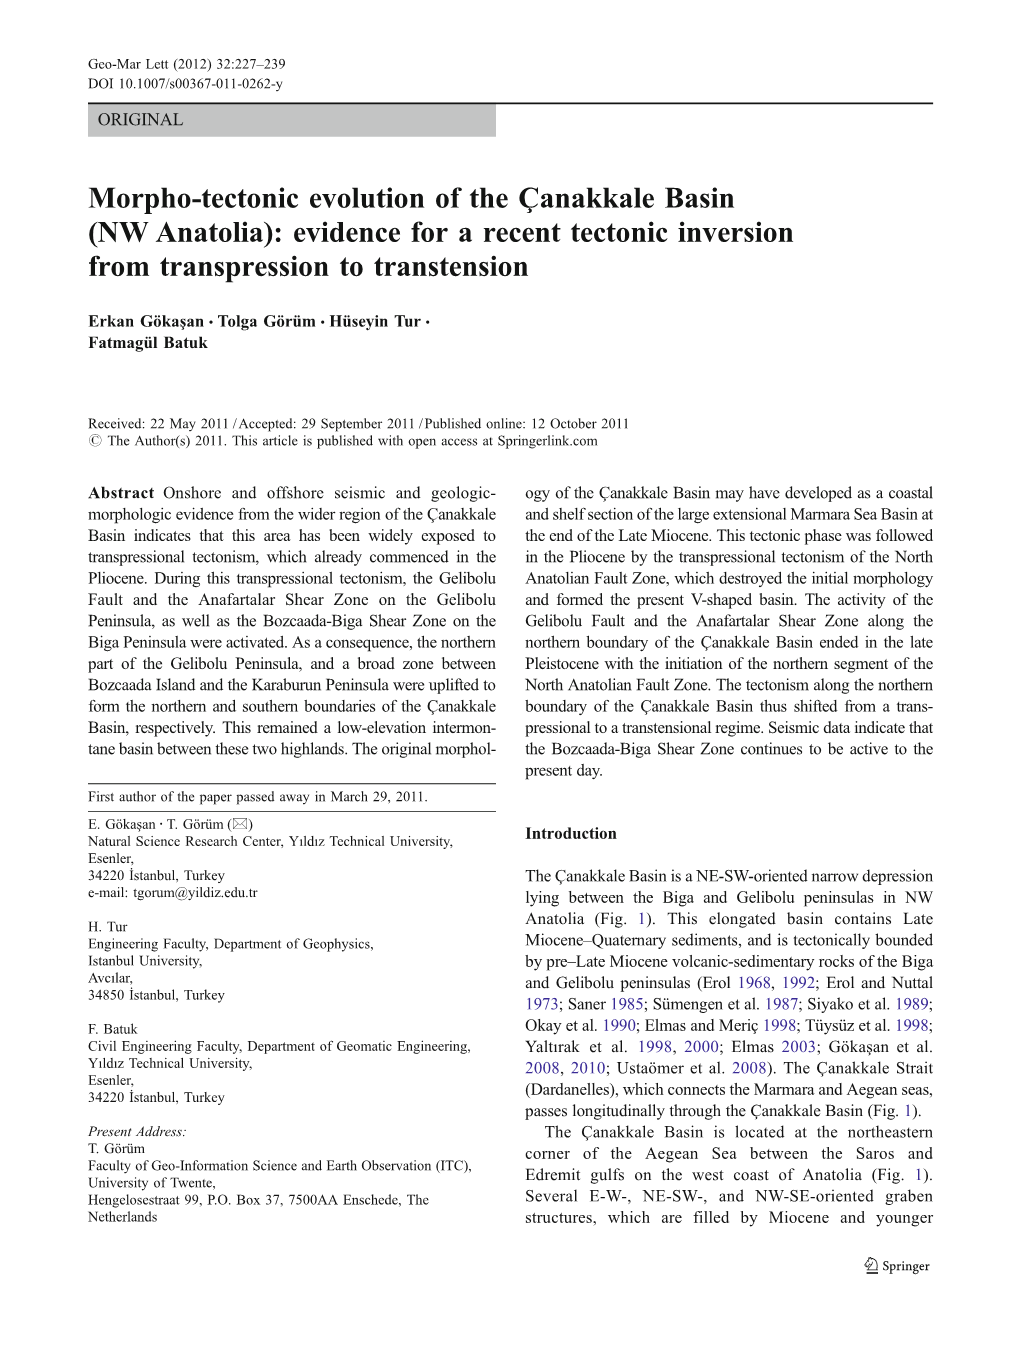 Morpho-Tectonic Evolution of the Çanakkale Basin (NW Anatolia): Evidence for a Recent Tectonic Inversion from Transpression to Transtension